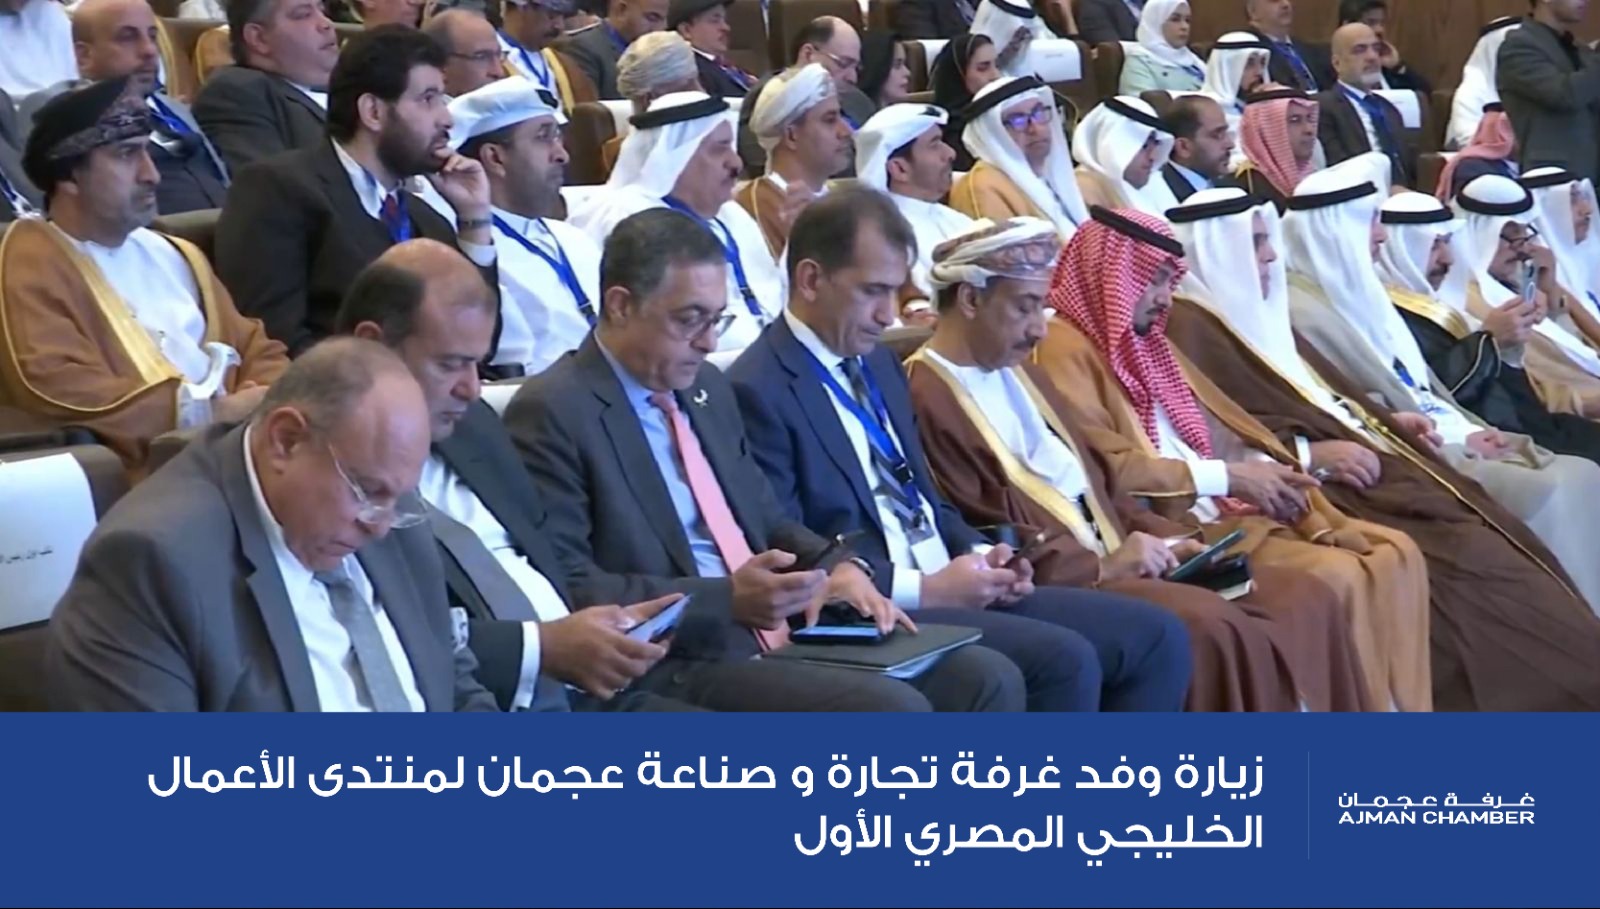 Ajman Chamber participates in the first EGY GCC Business Forum in Cairo